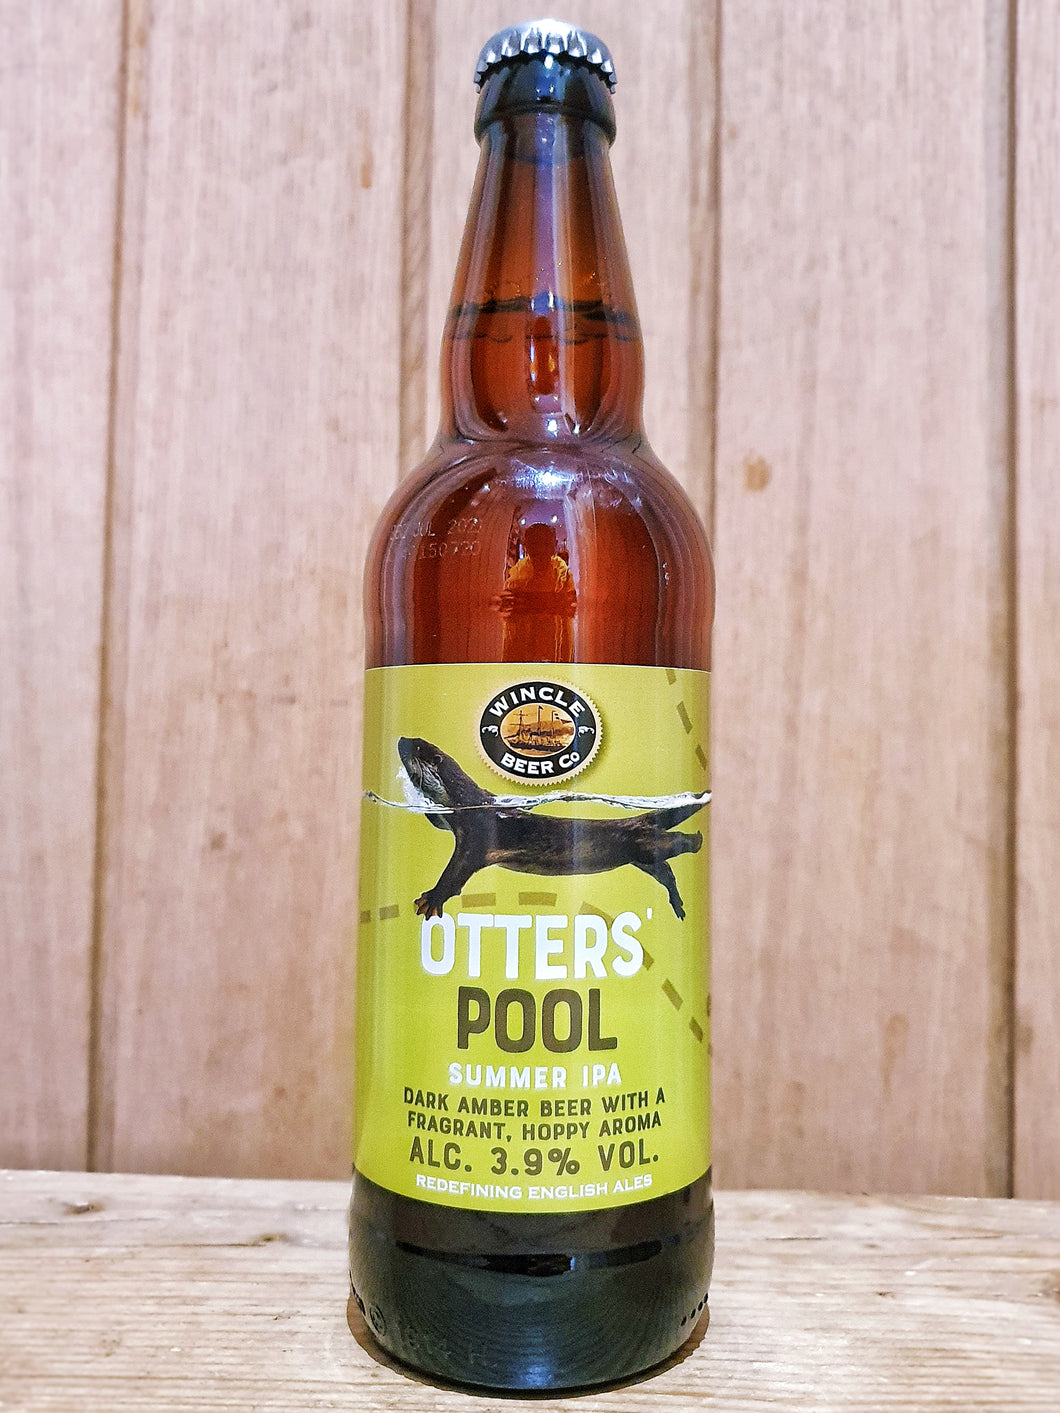 Wincle Beer Co - Otters Pool